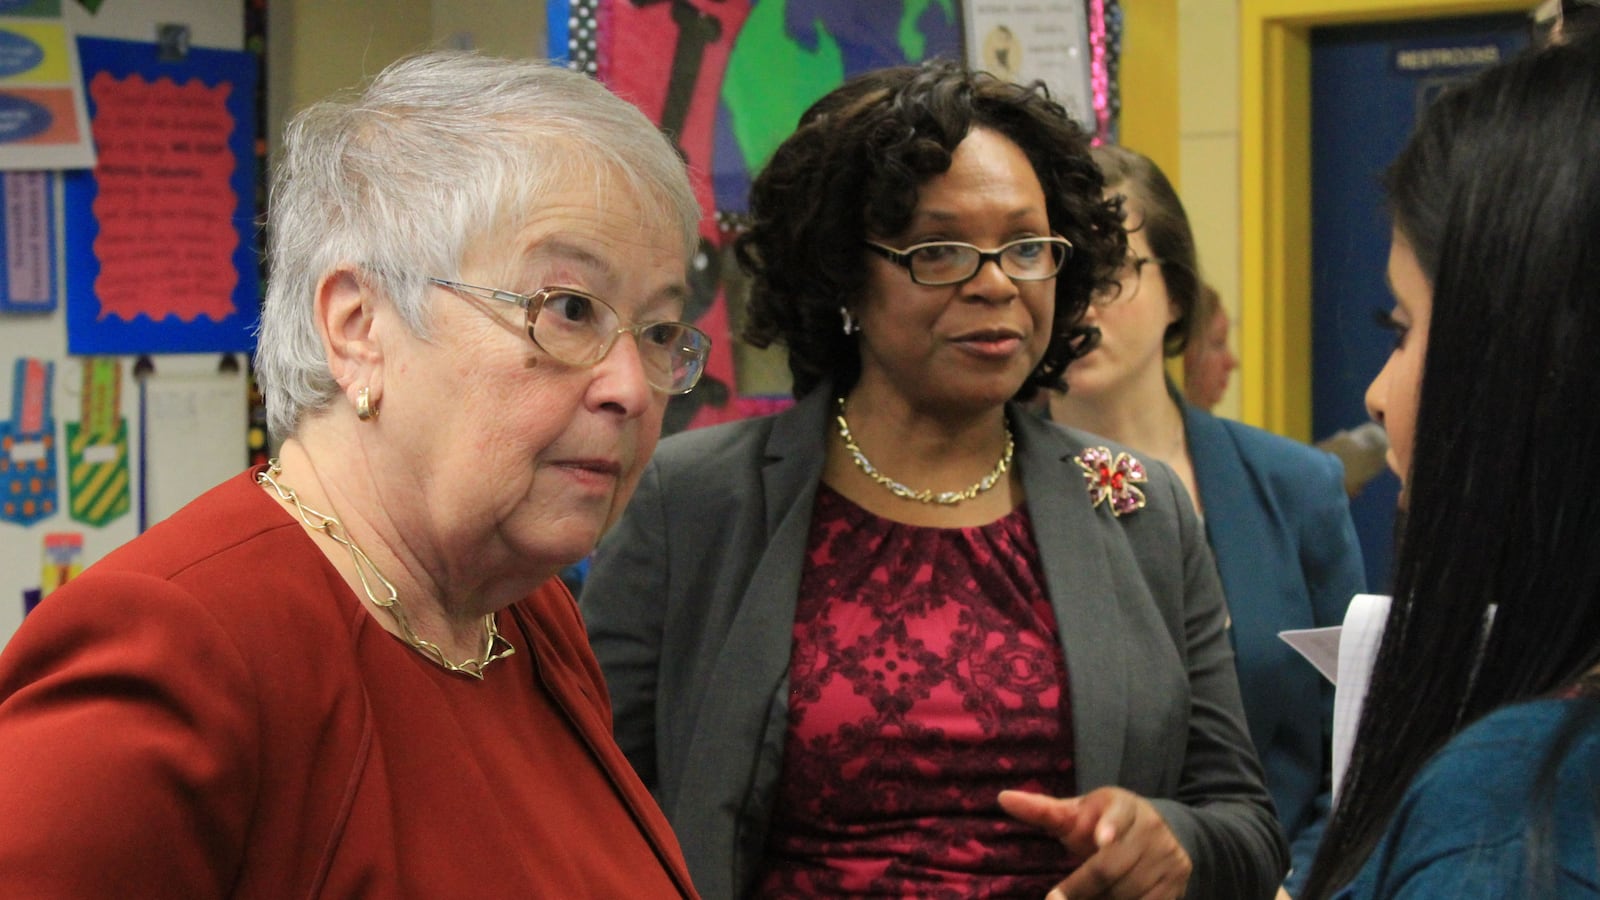 Chancellor Carmen Fariña talks to a teacher at the School of Integrated Learning in Brooklyn.